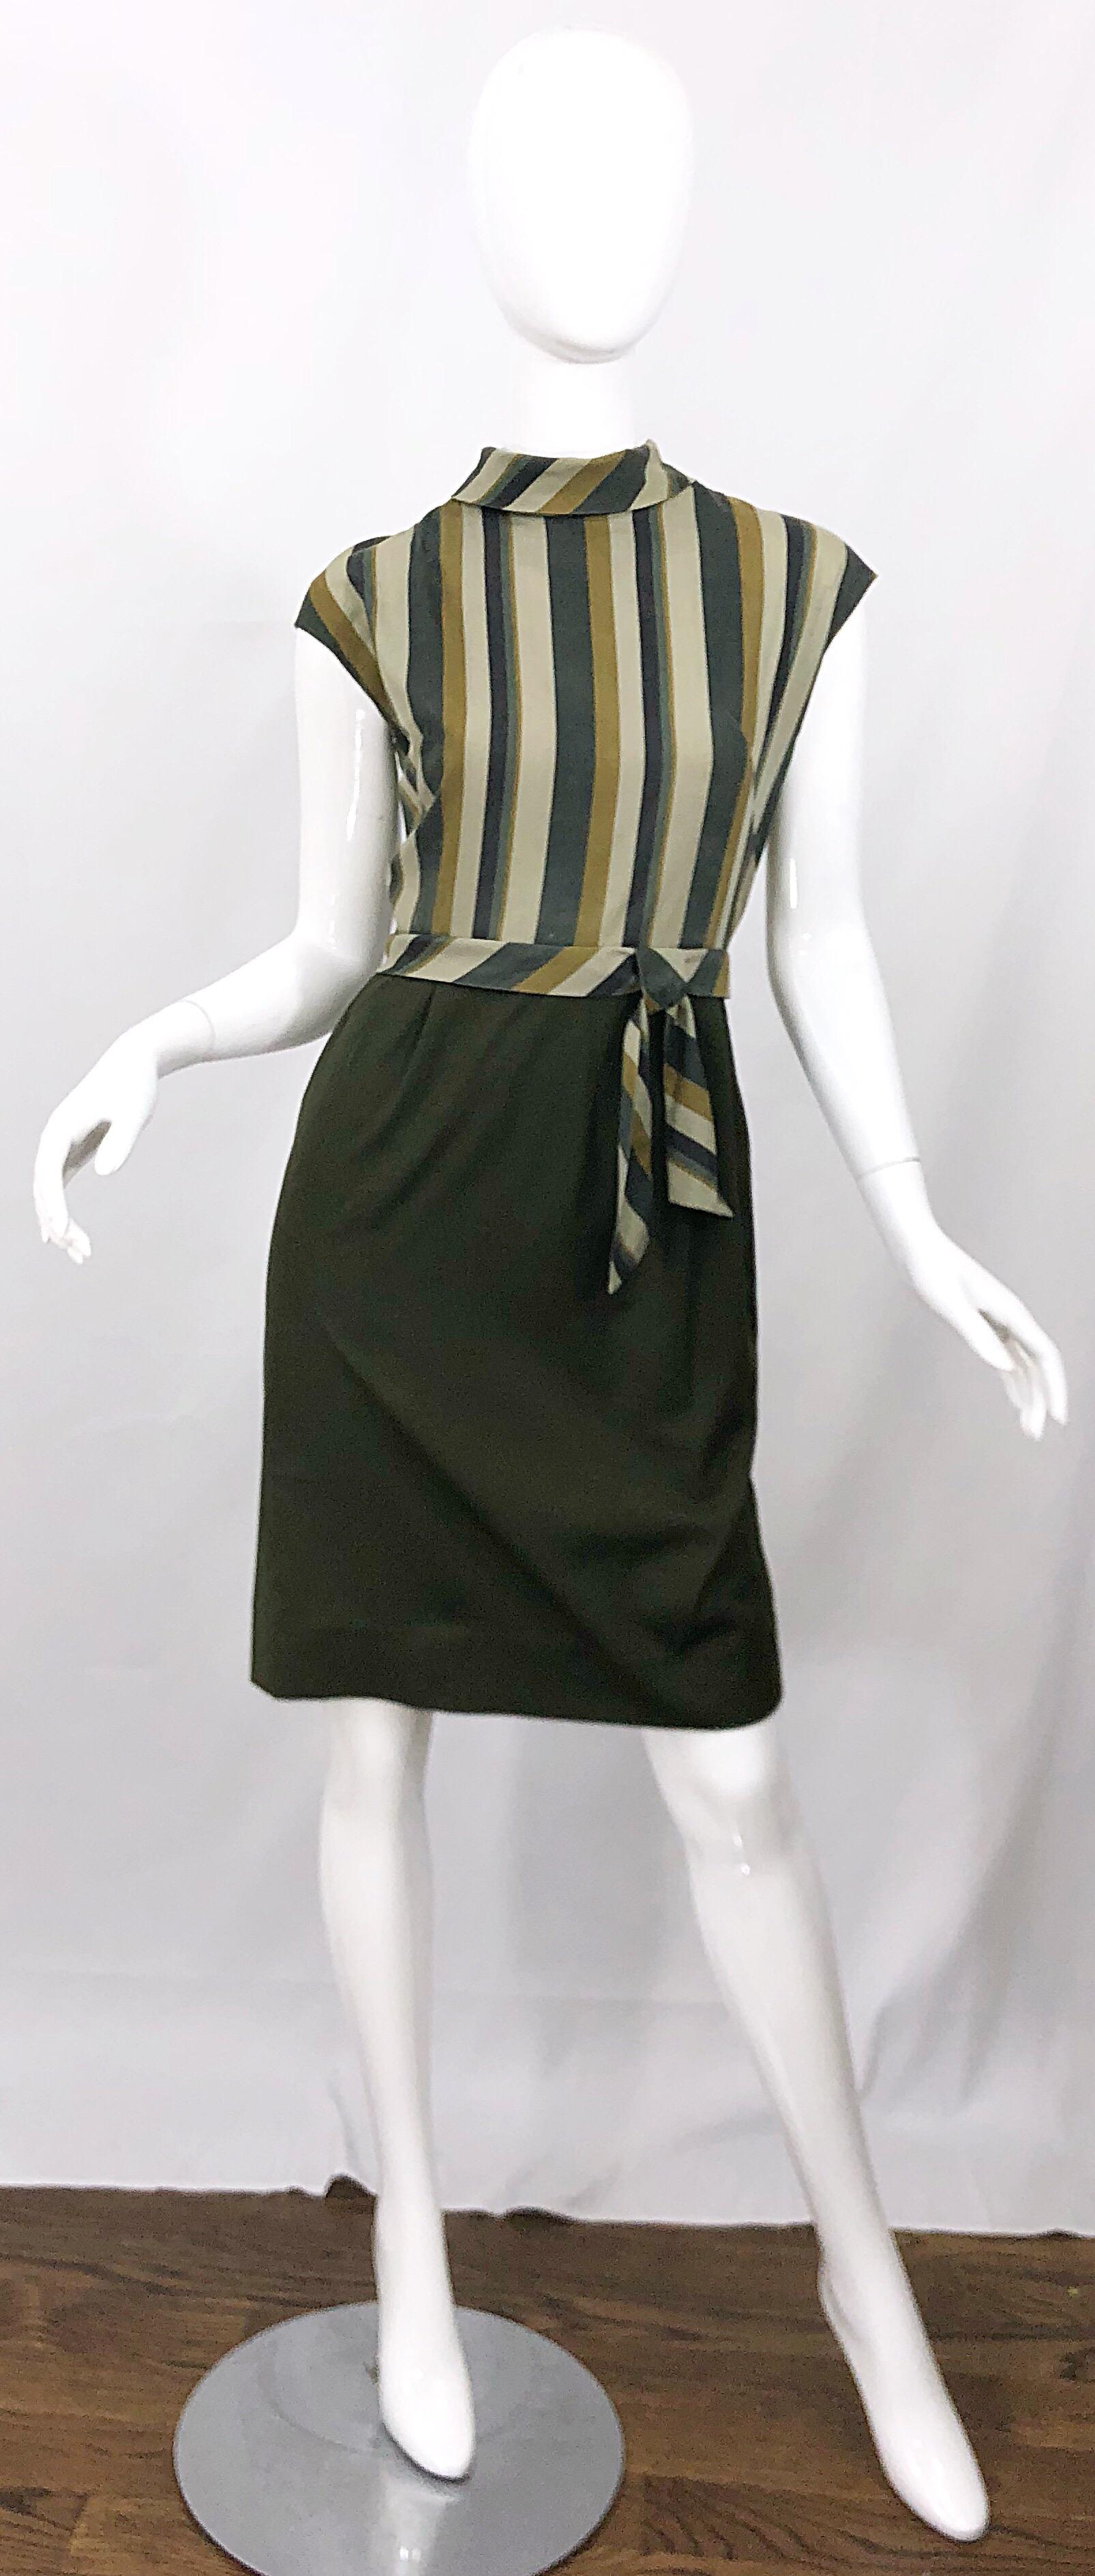 Chic early 60s chartreuse green and olive green cap sleeve cotton dress. Features flattering vertical stripes on the fitted bodice, with a high neck, and attached belt. Dipped back collar. Dark hunter green skirt has some give. Full metal zipper up